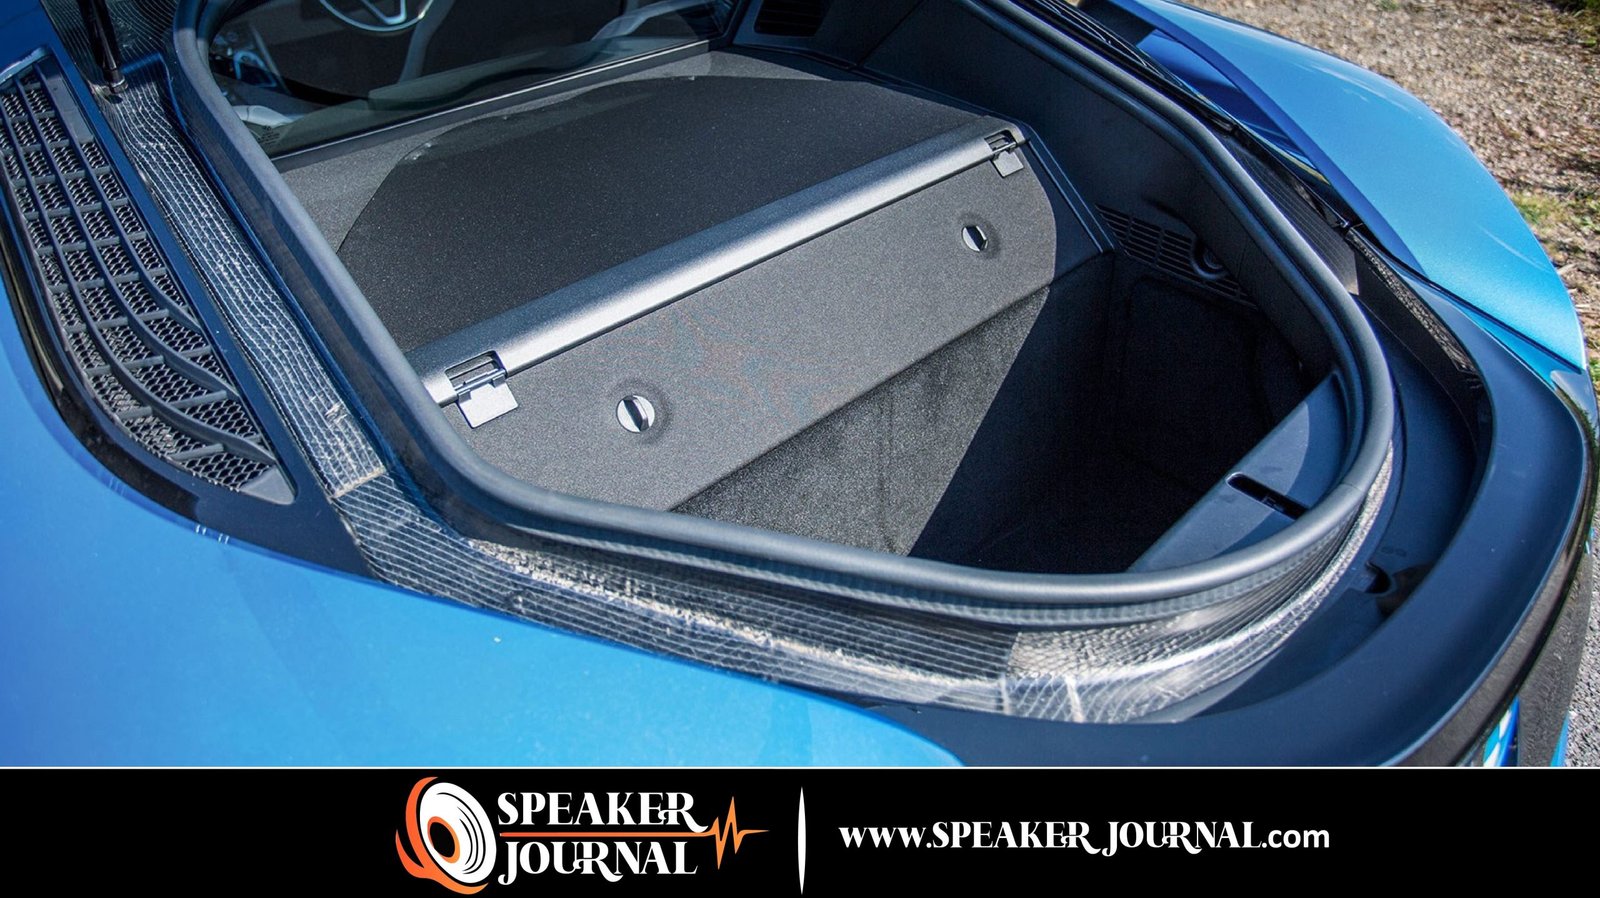 What Is A Free Air Subwoofer by speakerjournal.com